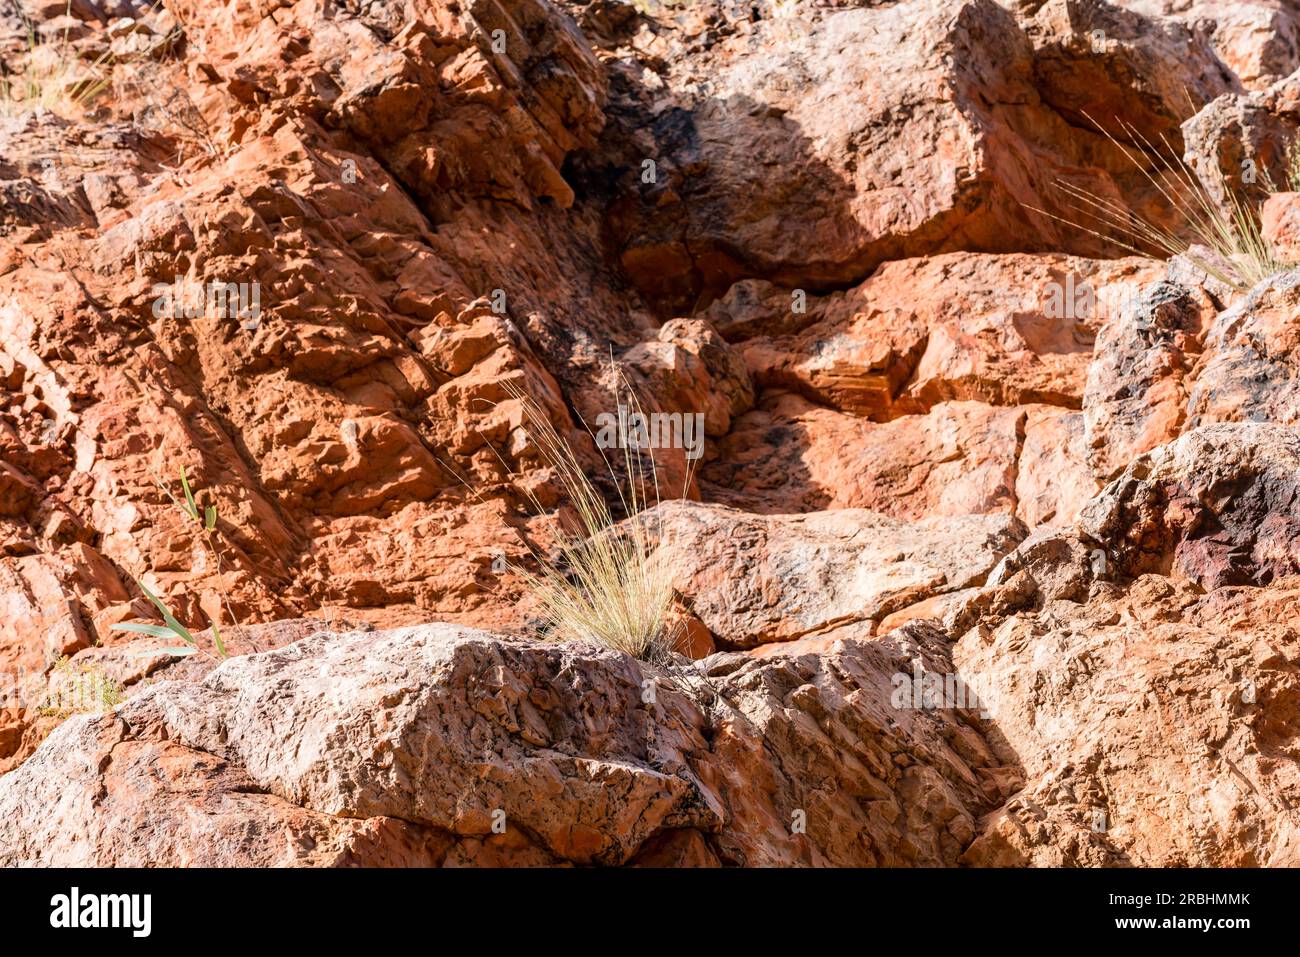 A small spinifex plant surviving on a ledge in the siltstone walls of Emily Gap (Yeperenye) near Alice Springs (Mparntwe) in Central Australia Stock Photo